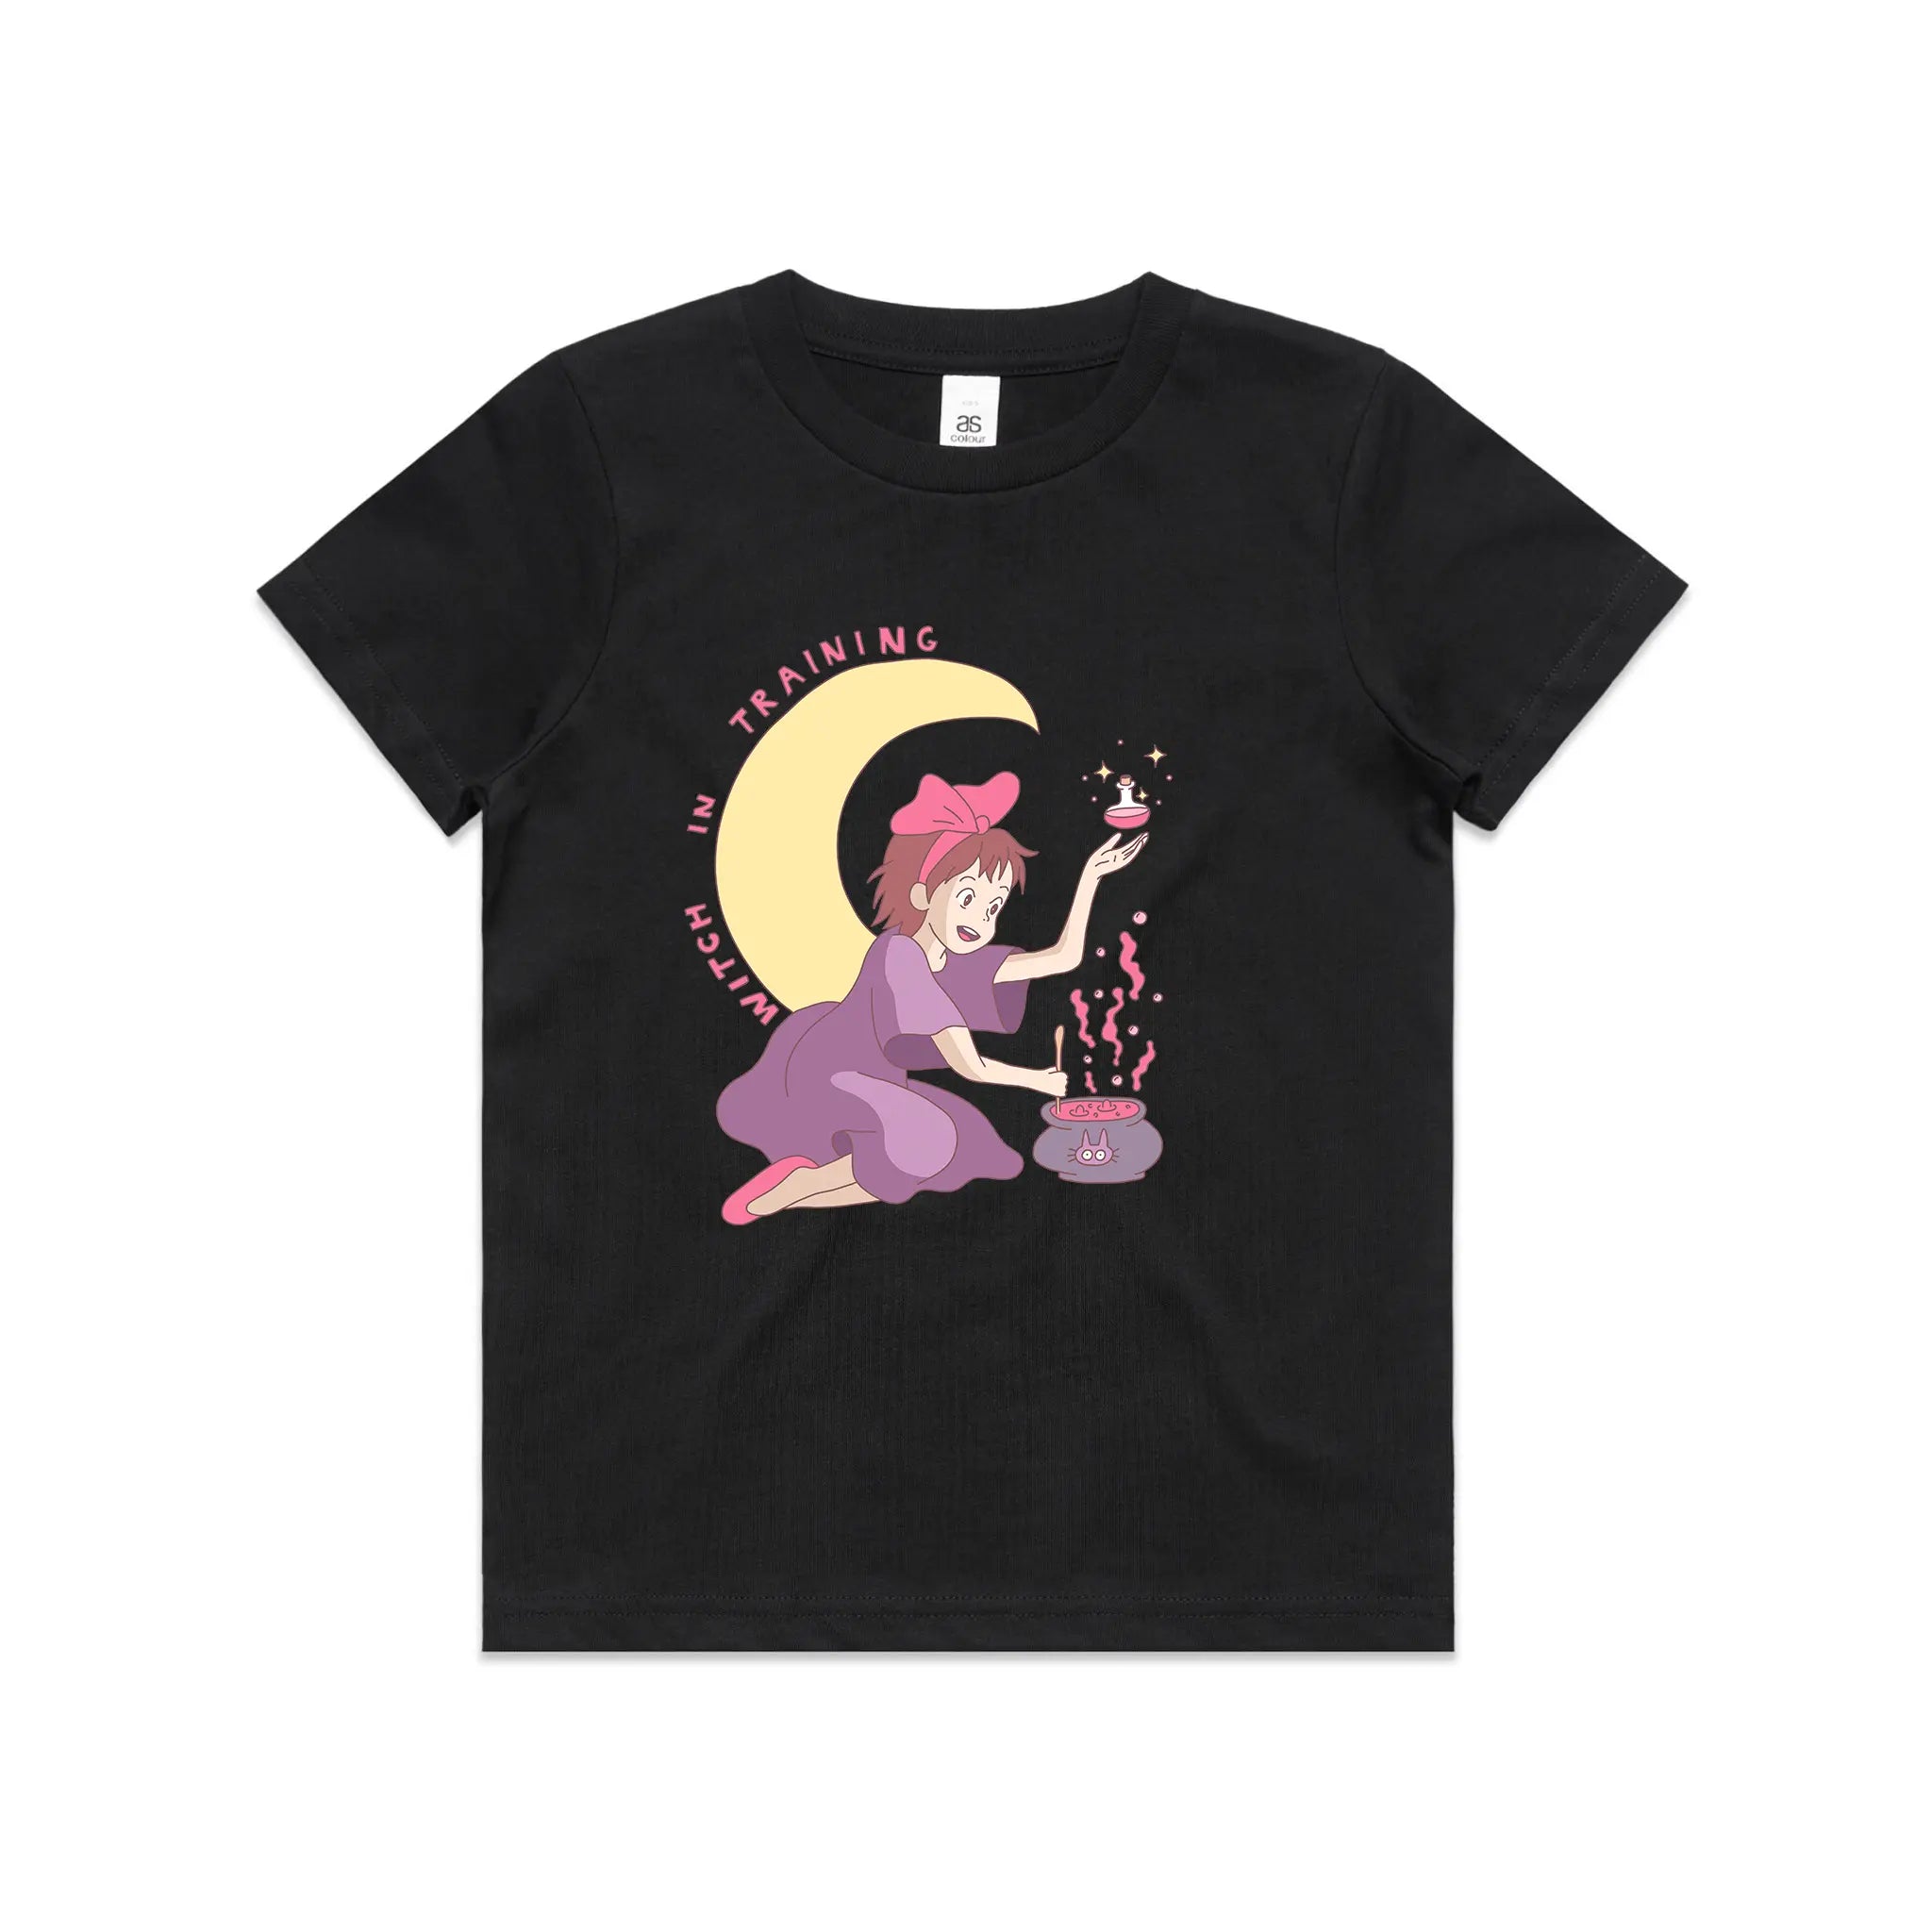 Witch In Training Kids Tee